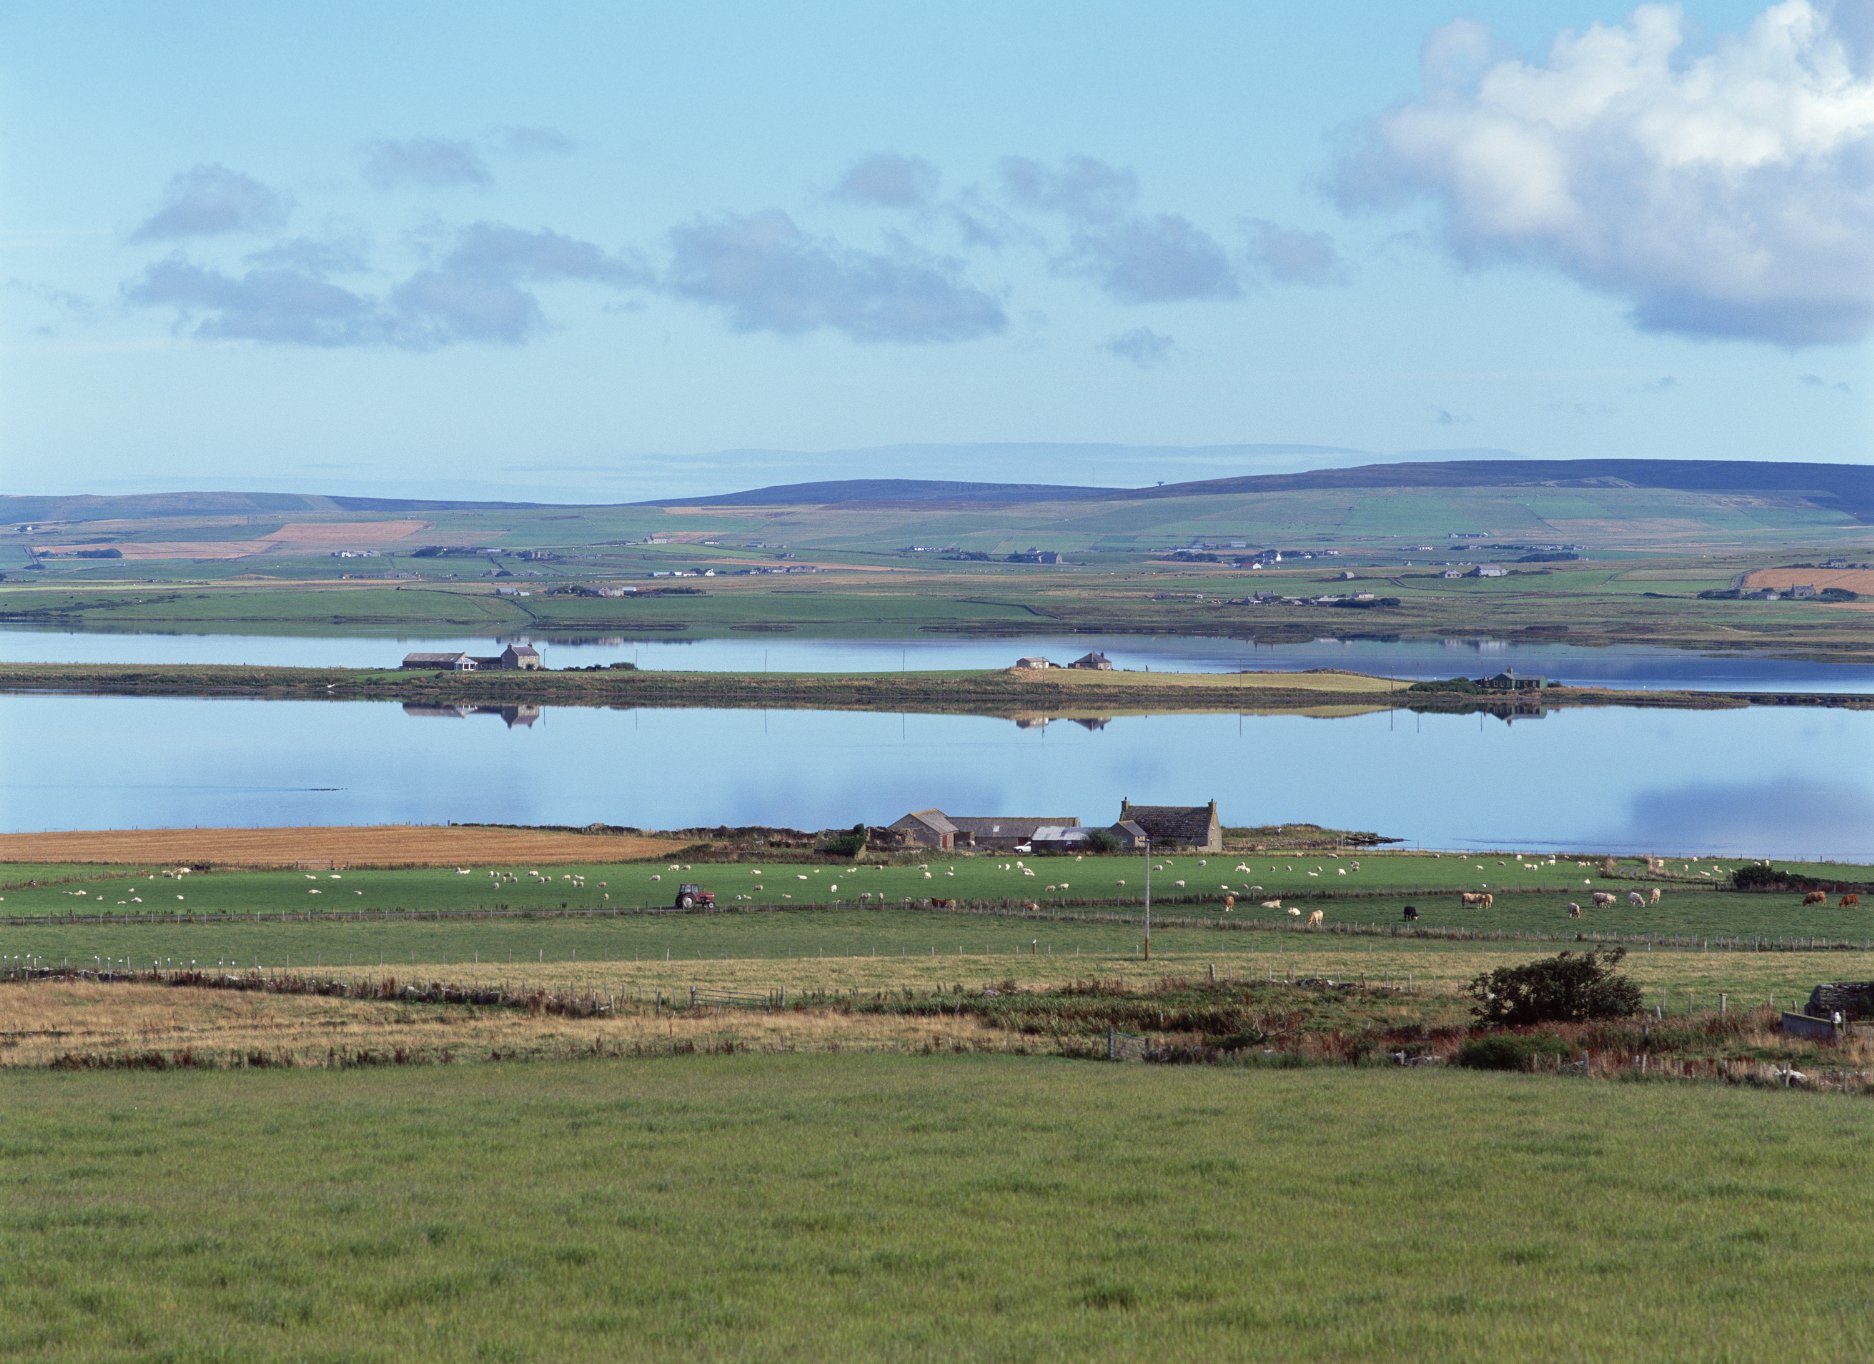 View over Brodgar in Orkney - image by Doug Houghton